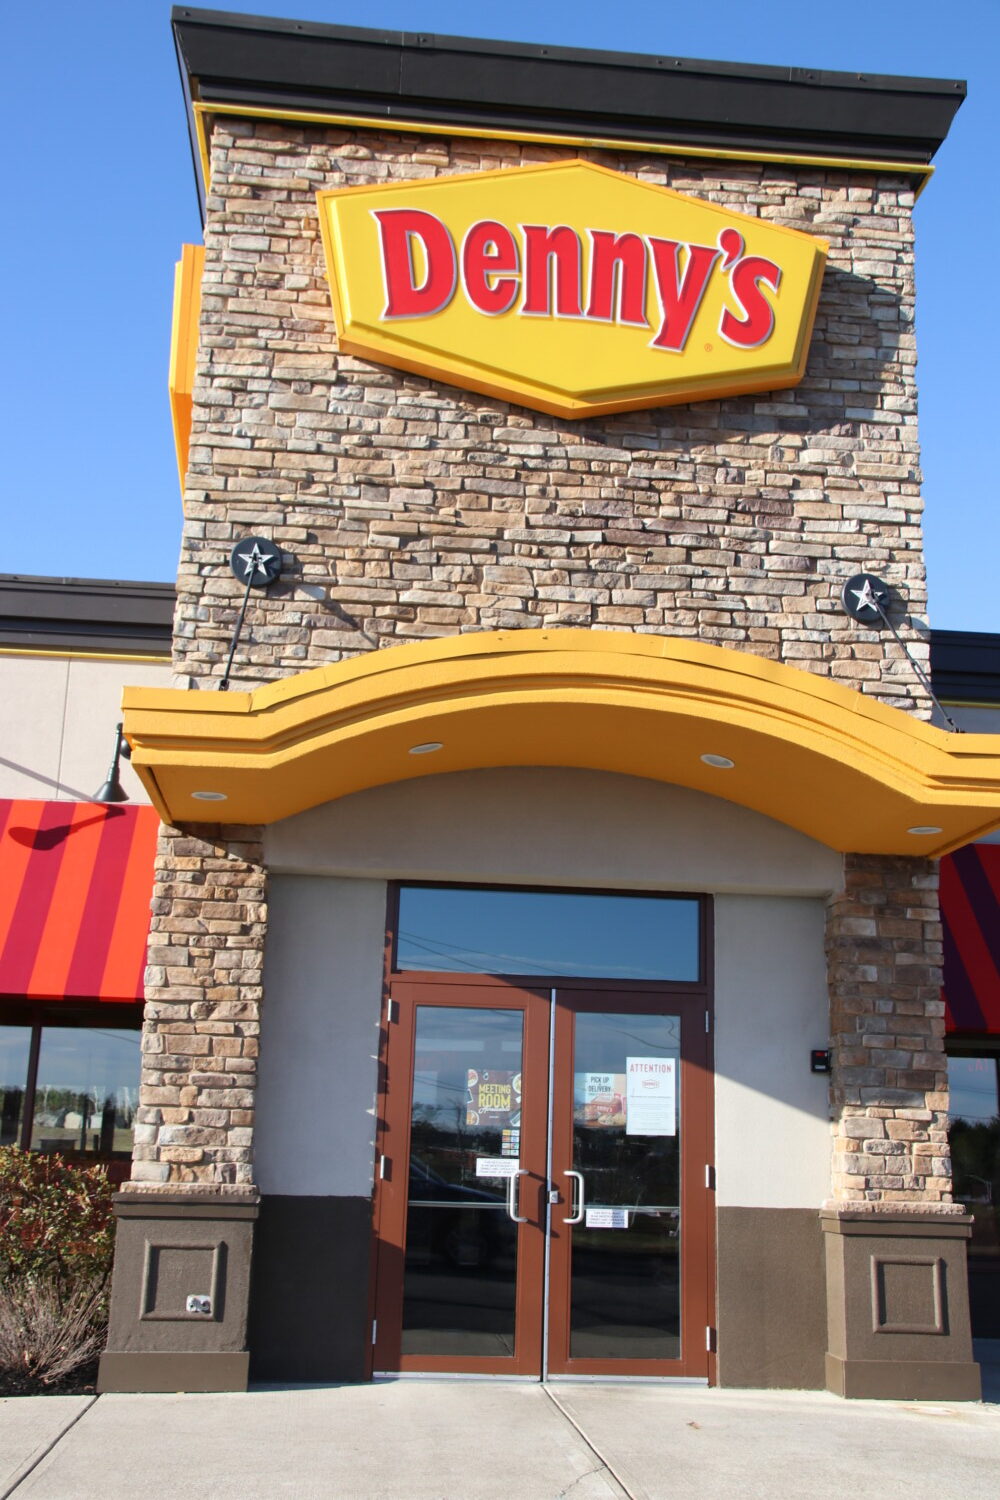 Denny's on the App Store